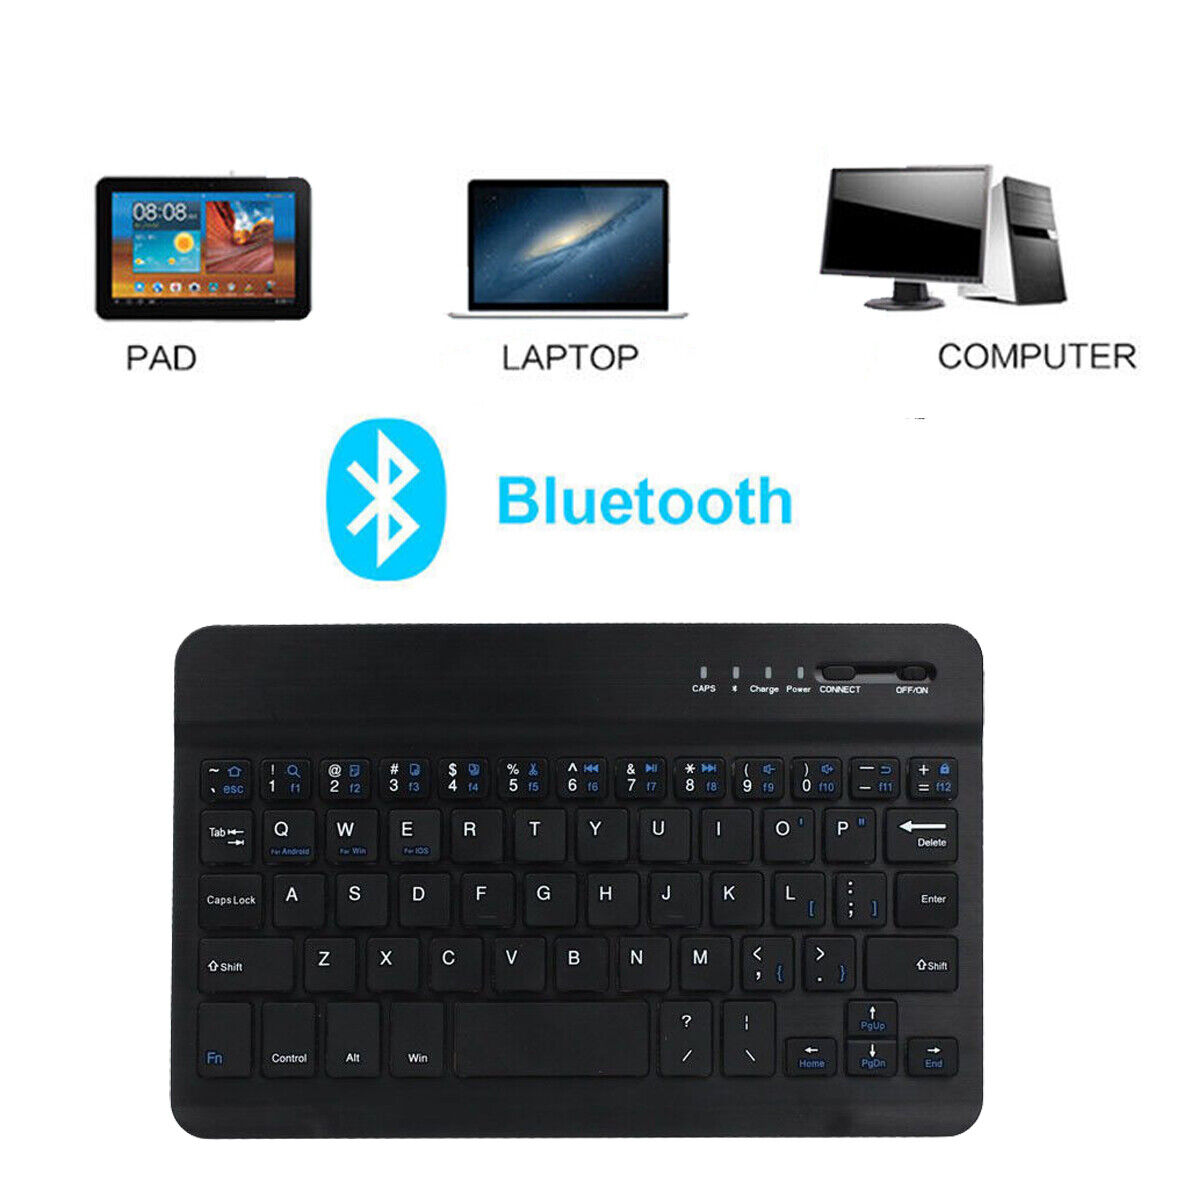 2.4GHz Bluetooth 3.0 Wireless Keyboard For Windows Android IOS Tablet Phone PC